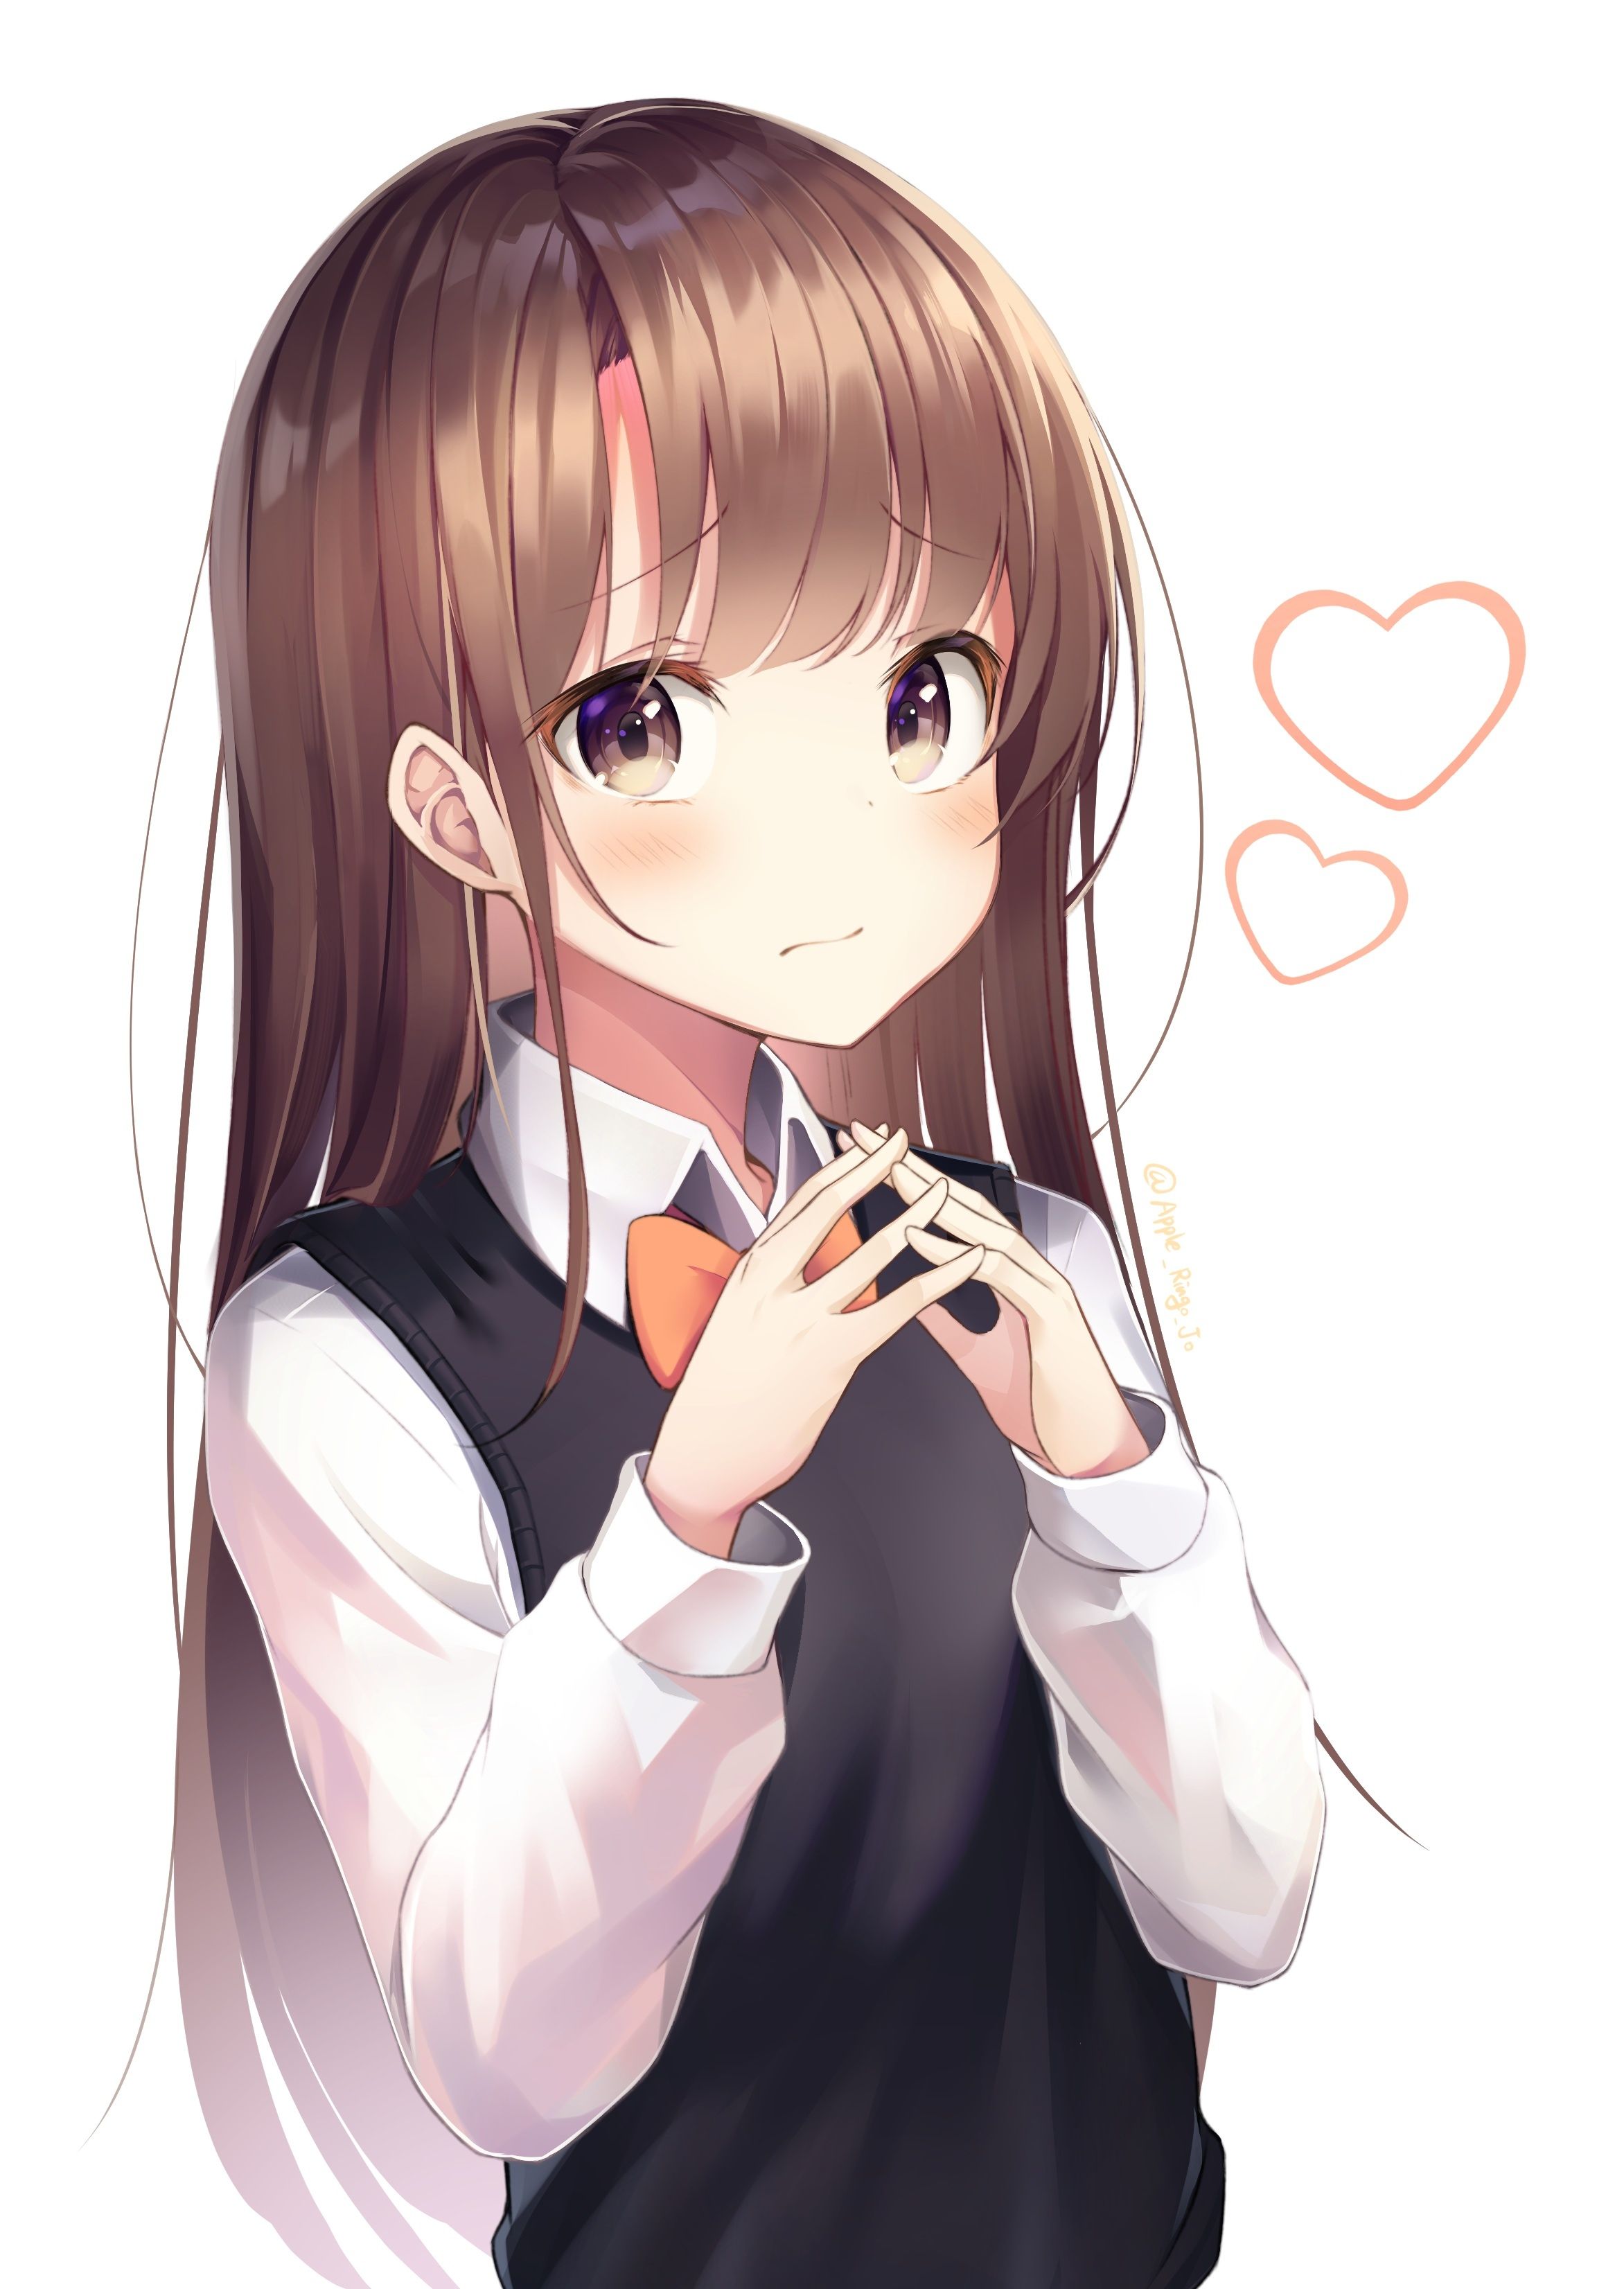 Pretty Anime Girl with Brown Hair